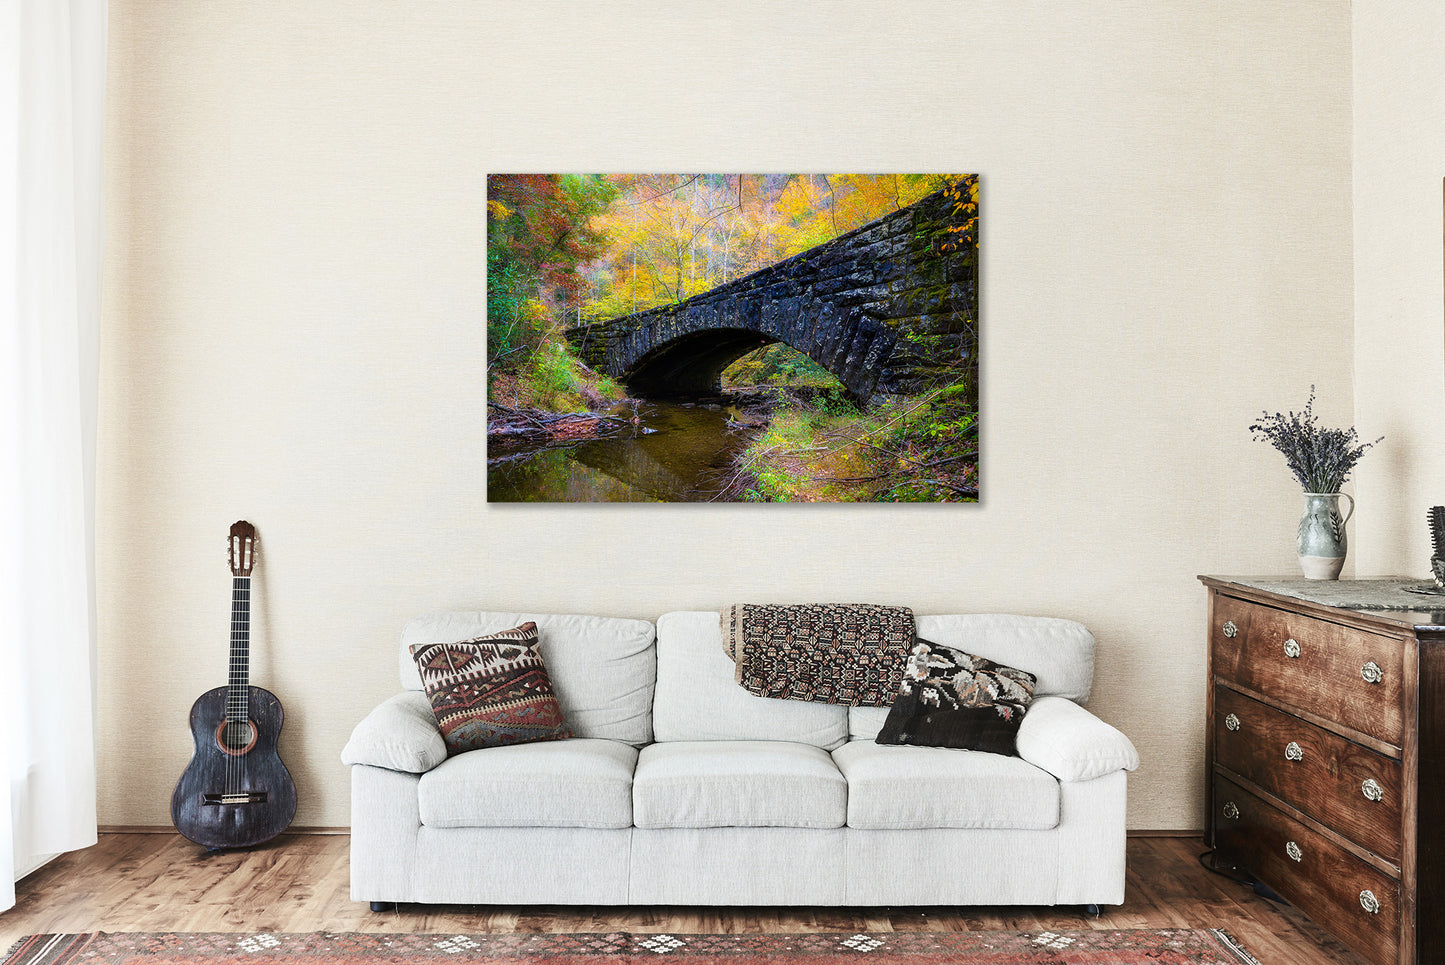 Great Smoky Mountains Metal Print (Ready to Hang) Photo on Aluminum of Stone Bridge Over Laurel Creek Surrounded by Fall Color in Tennessee Forest Wall Art Country Decor